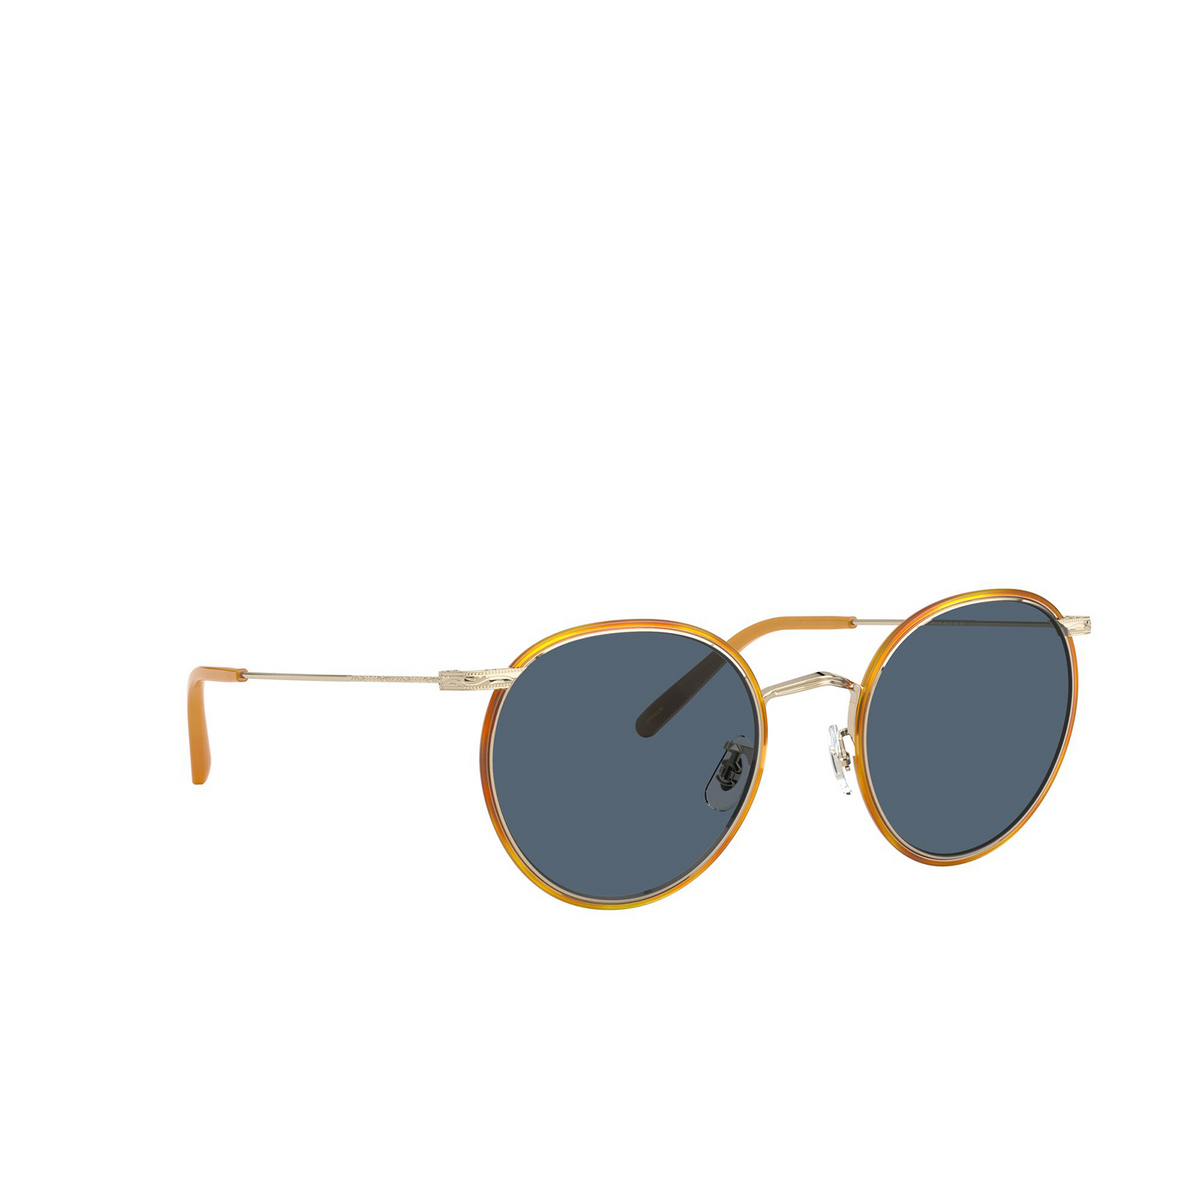 Oliver Peoples CASSON Sunglasses 503556 Soft Gold / Amber - three-quarters view